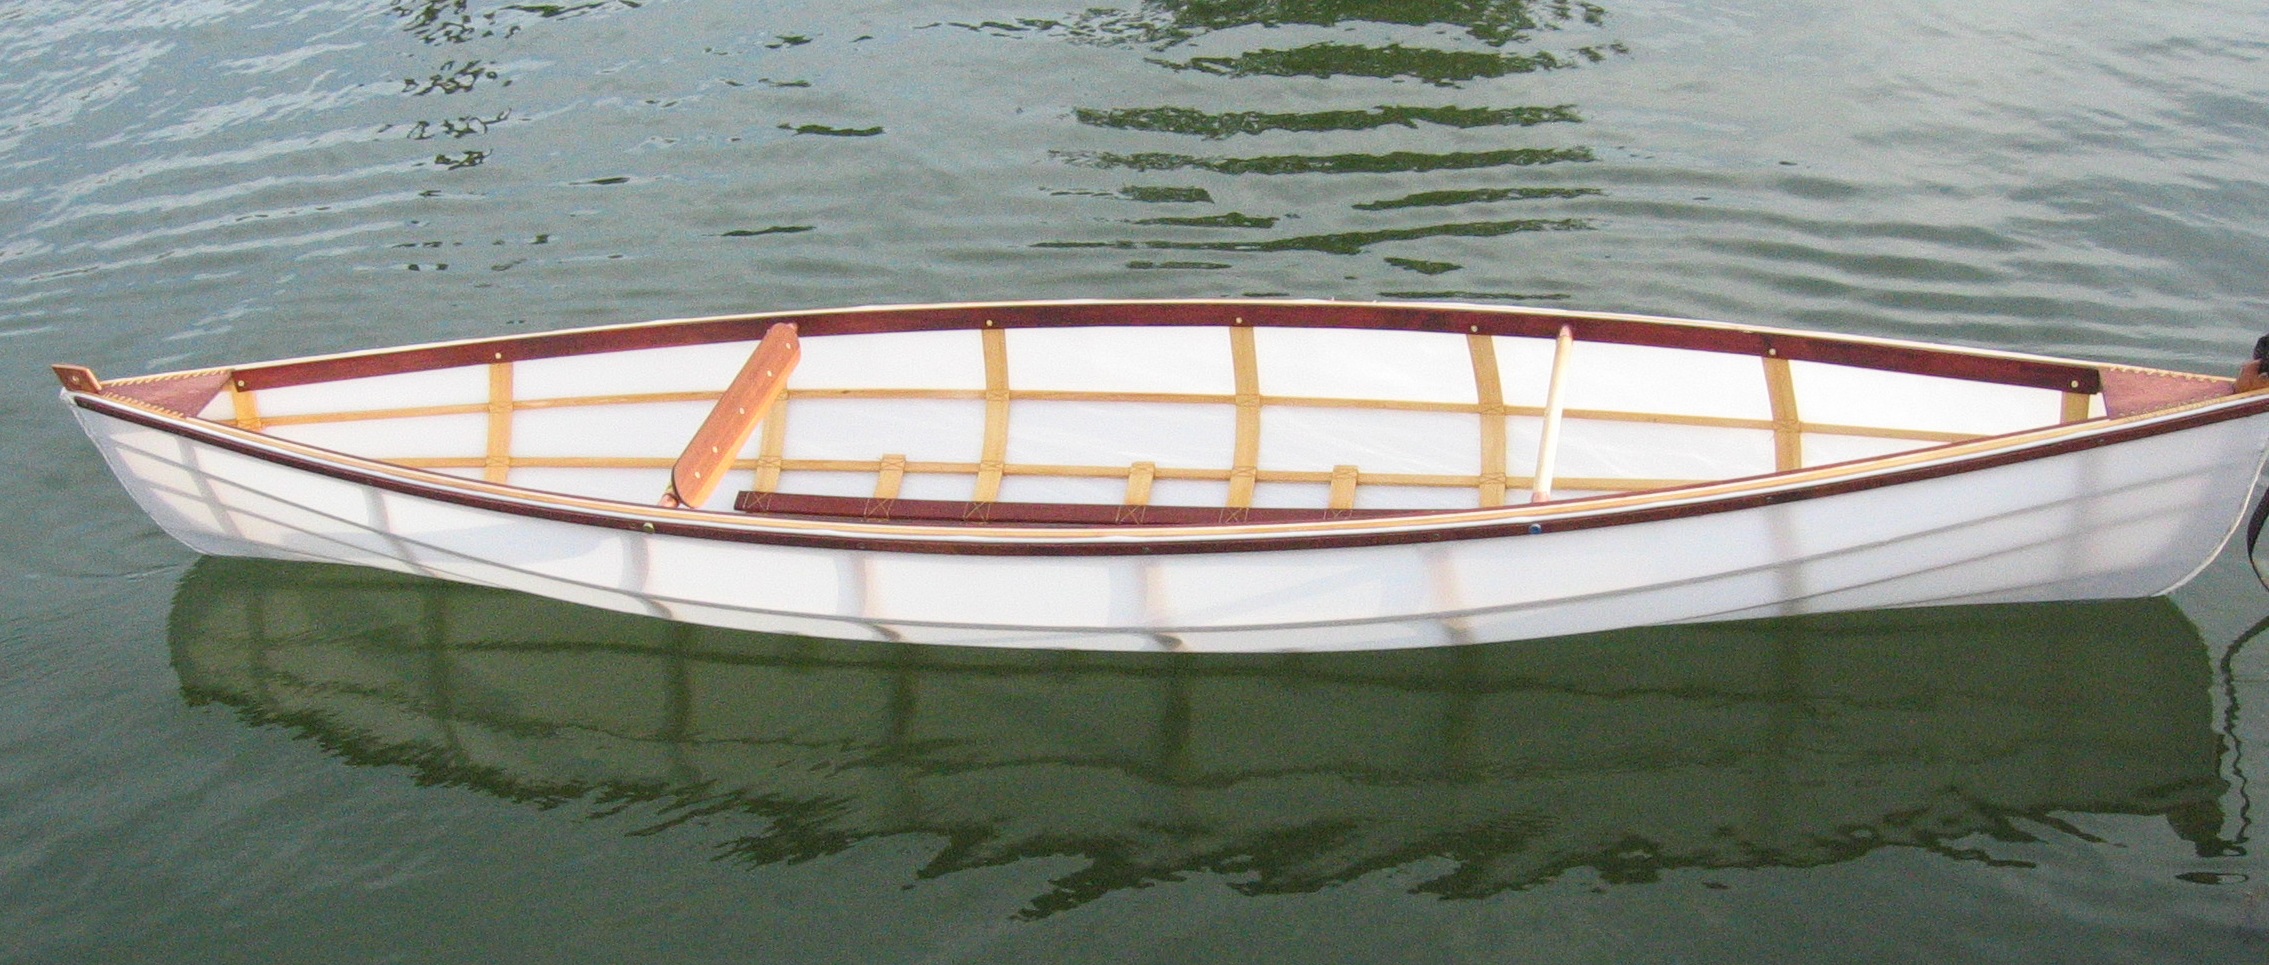 Finished Boats | Dreamcatcher Boats - Lightweight Canoes, Kayaks and 